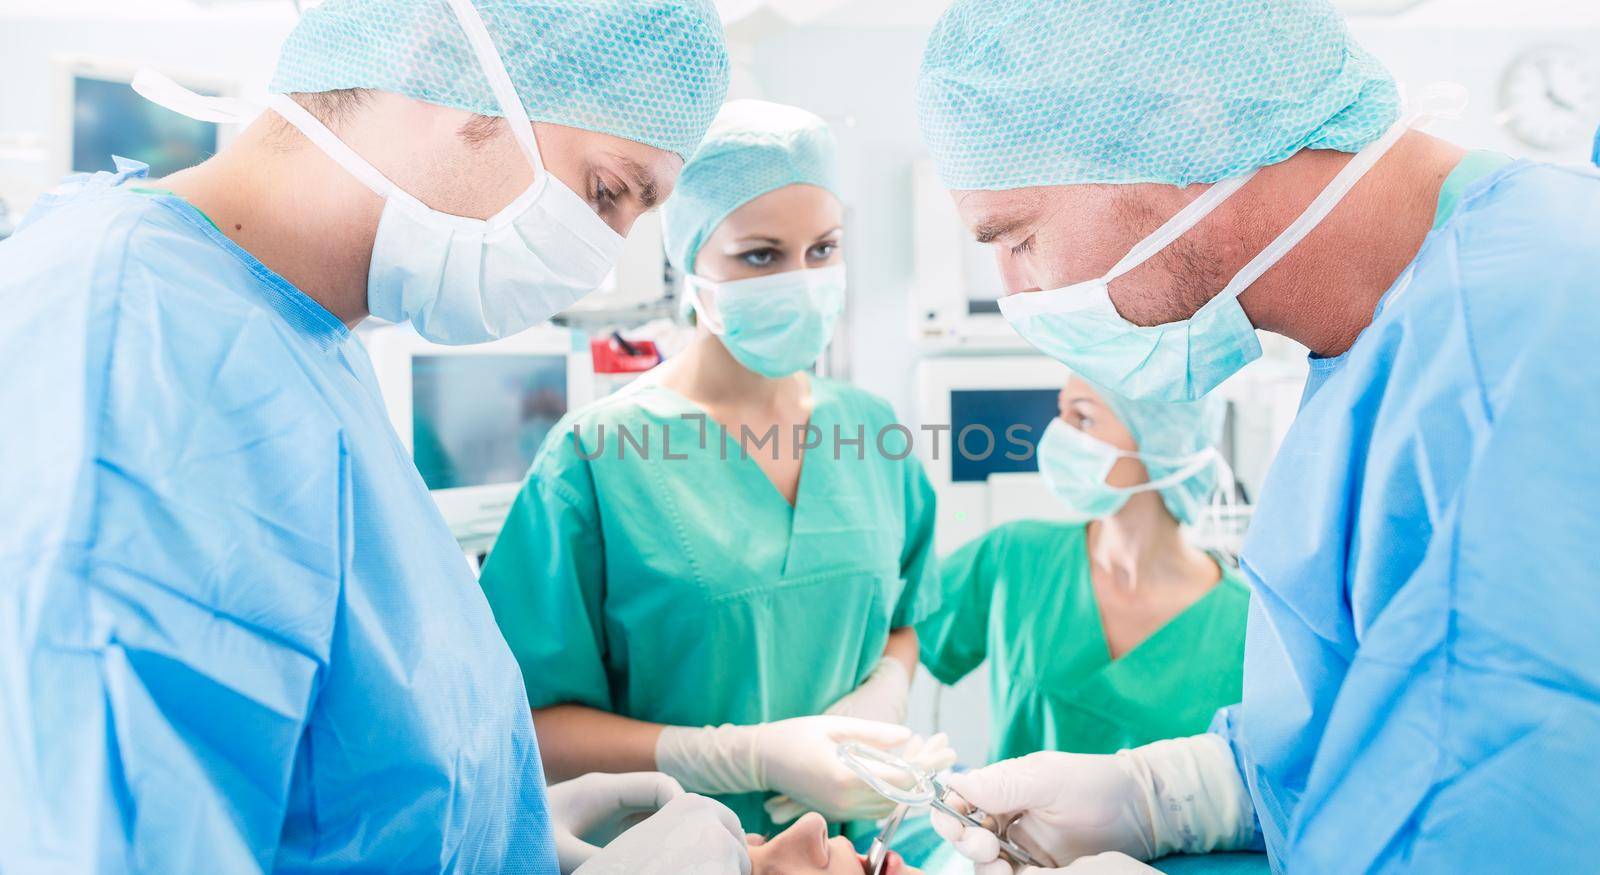 Surgeons or doctors in operating room of hospital by Kzenon